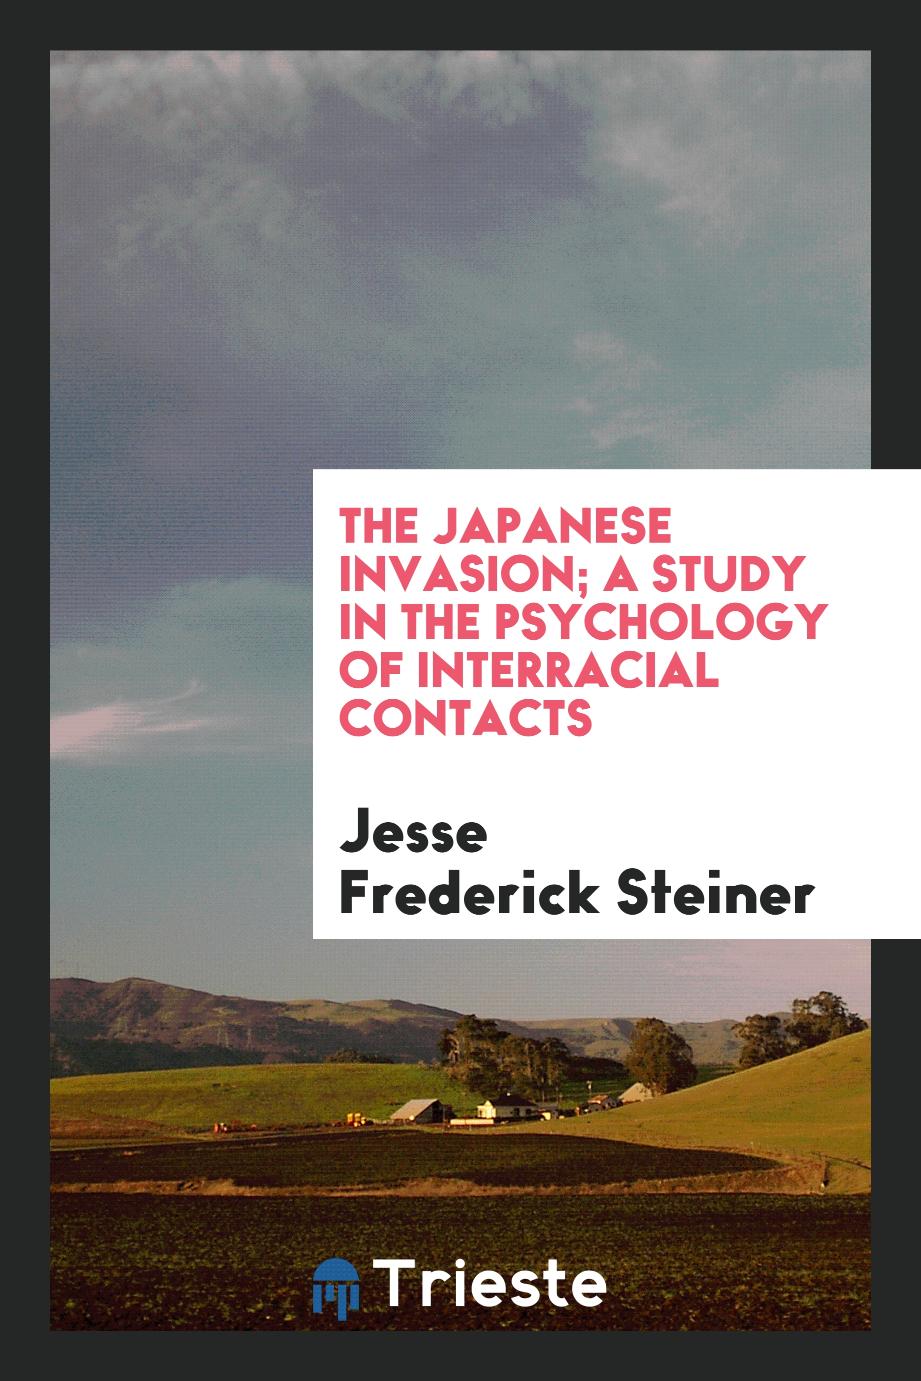 Jesse Frederick Steiner - The Japanese invasion; a study in the psychology of interracial contacts